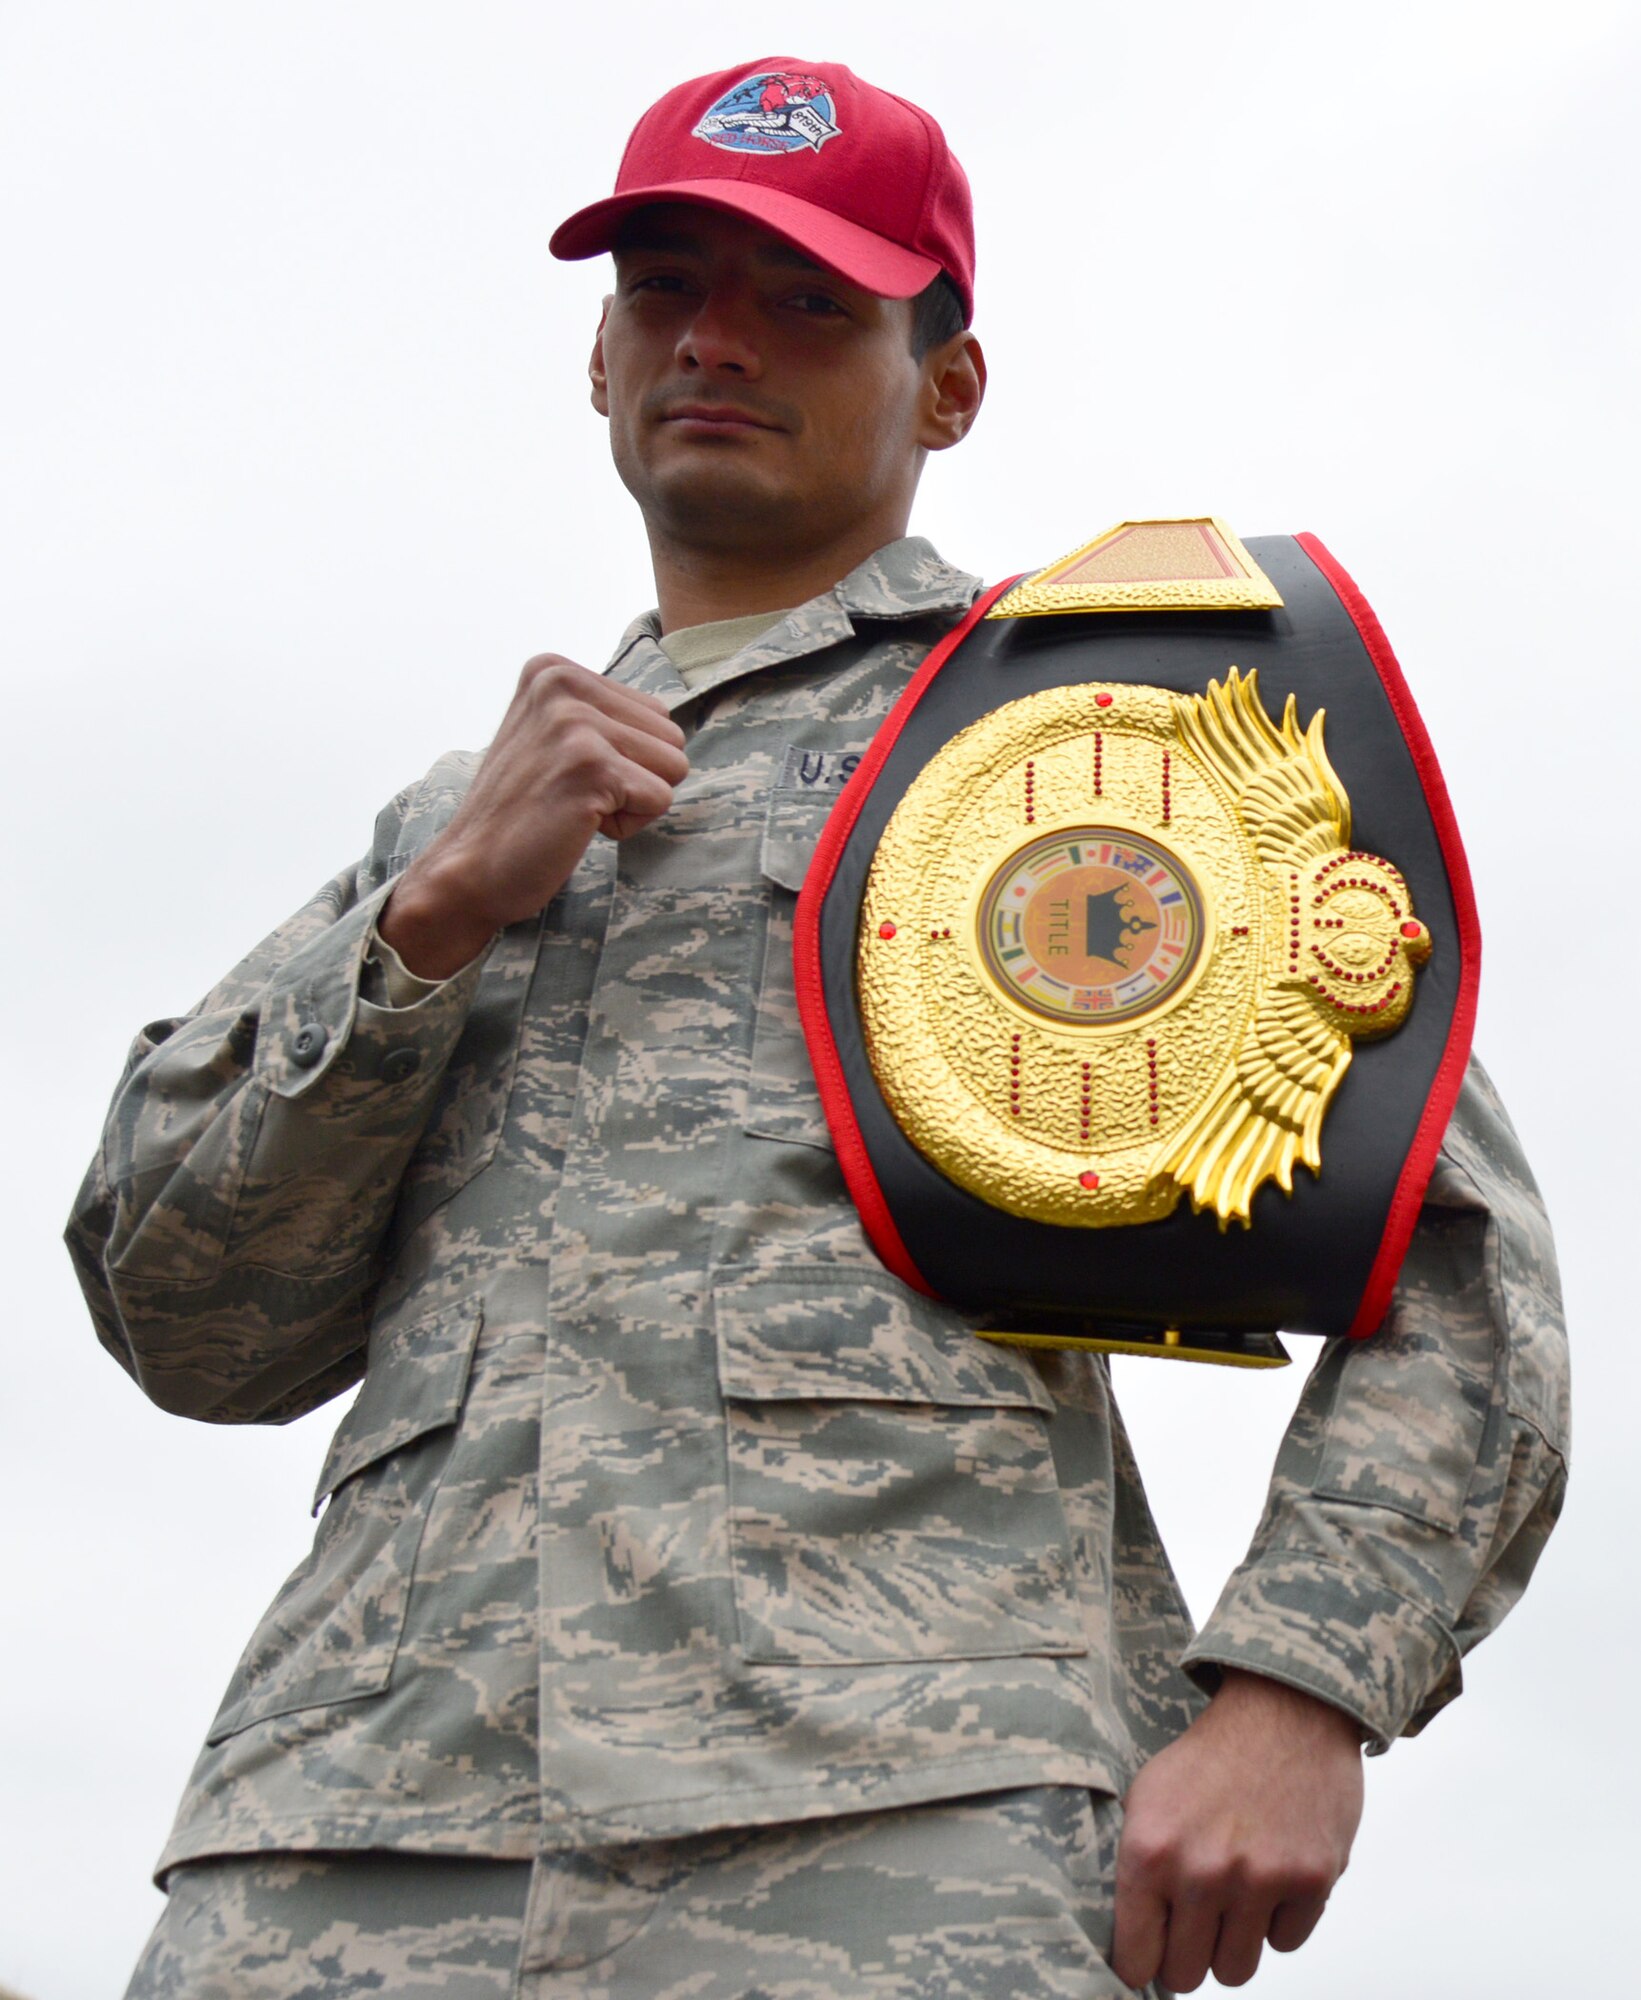 Senior Airman Mark Wirth, 819th RED HORSE Squadron structural engineer, poses for a photo Oct. 27, 2015, at Malmstrom Air Force Base, Mont. Wirth holds the title for the 125 pound fly weight division for Fight Force, a group he fights for. (U.S. Air Force photo/Airman Daniel Brosam)